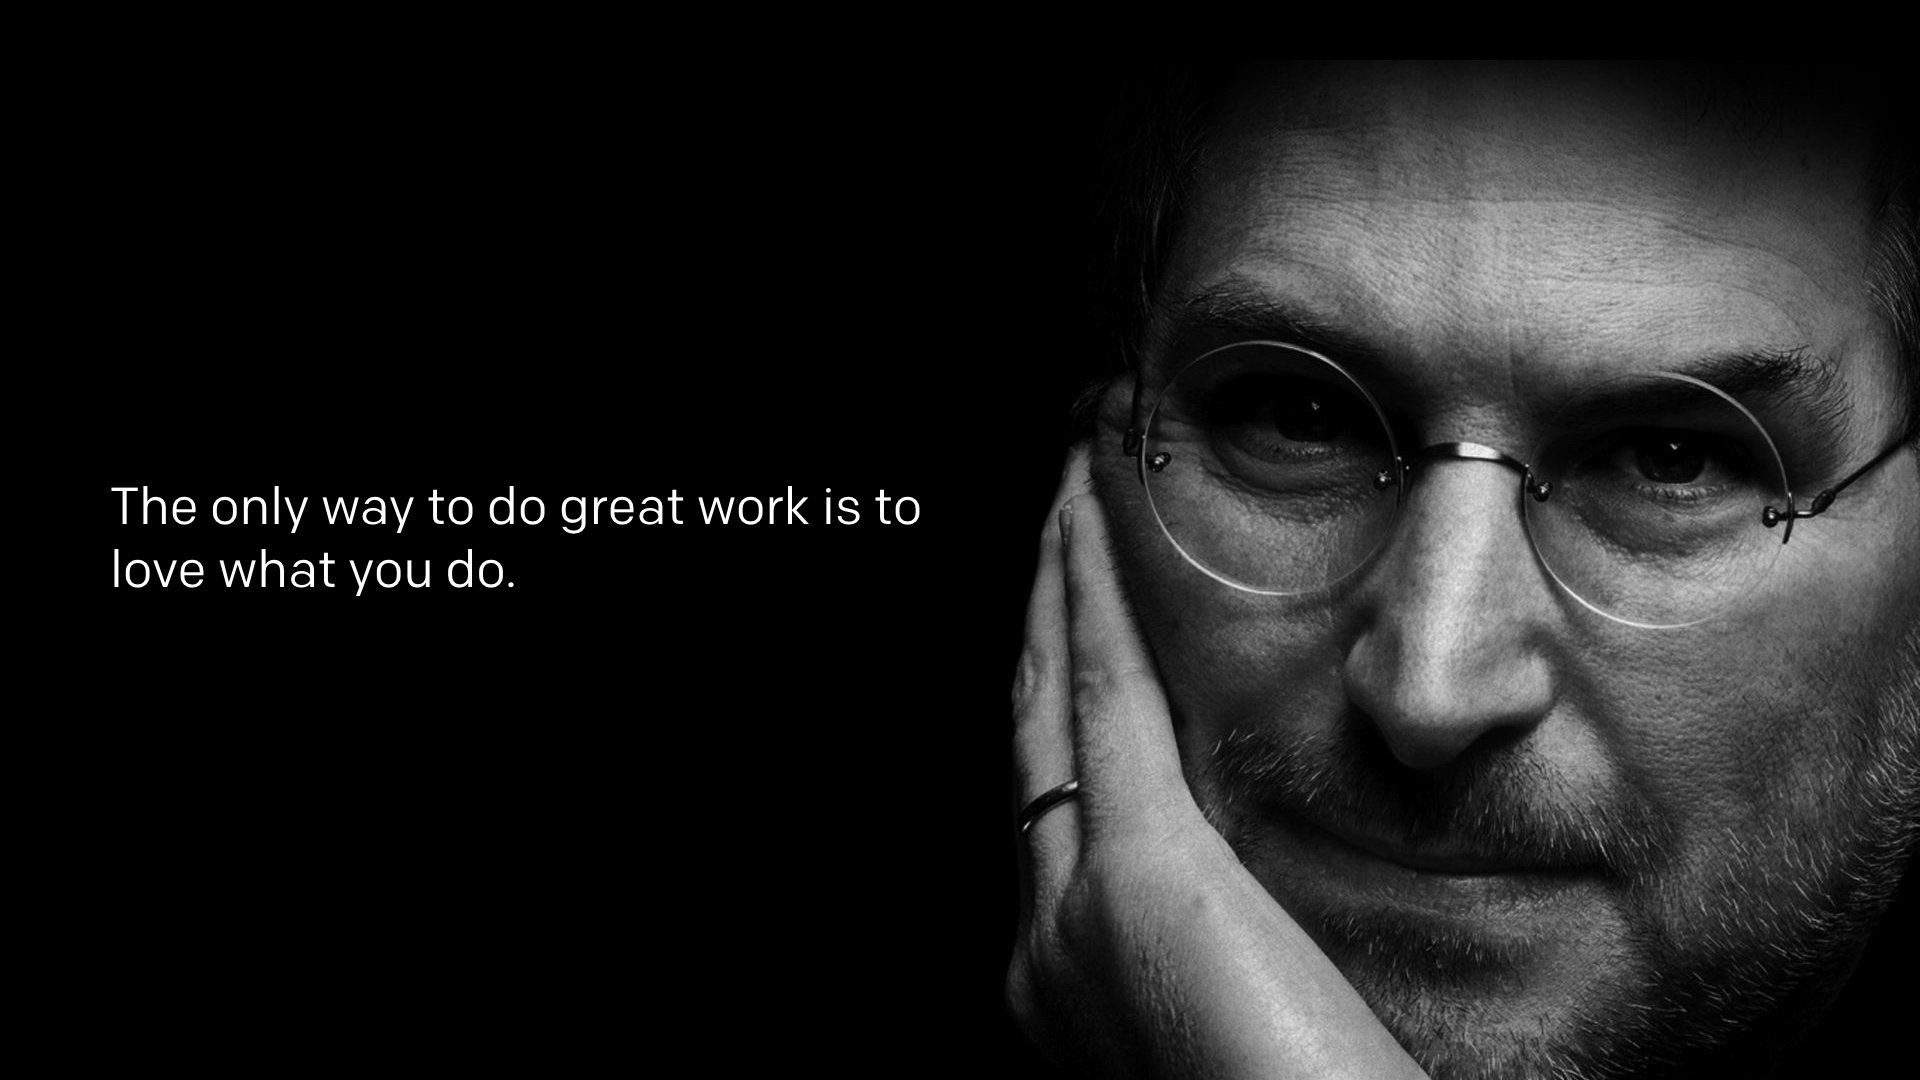 Happy Birthday, Steve Jobs! You will remain an inspiration for us and millions more. 